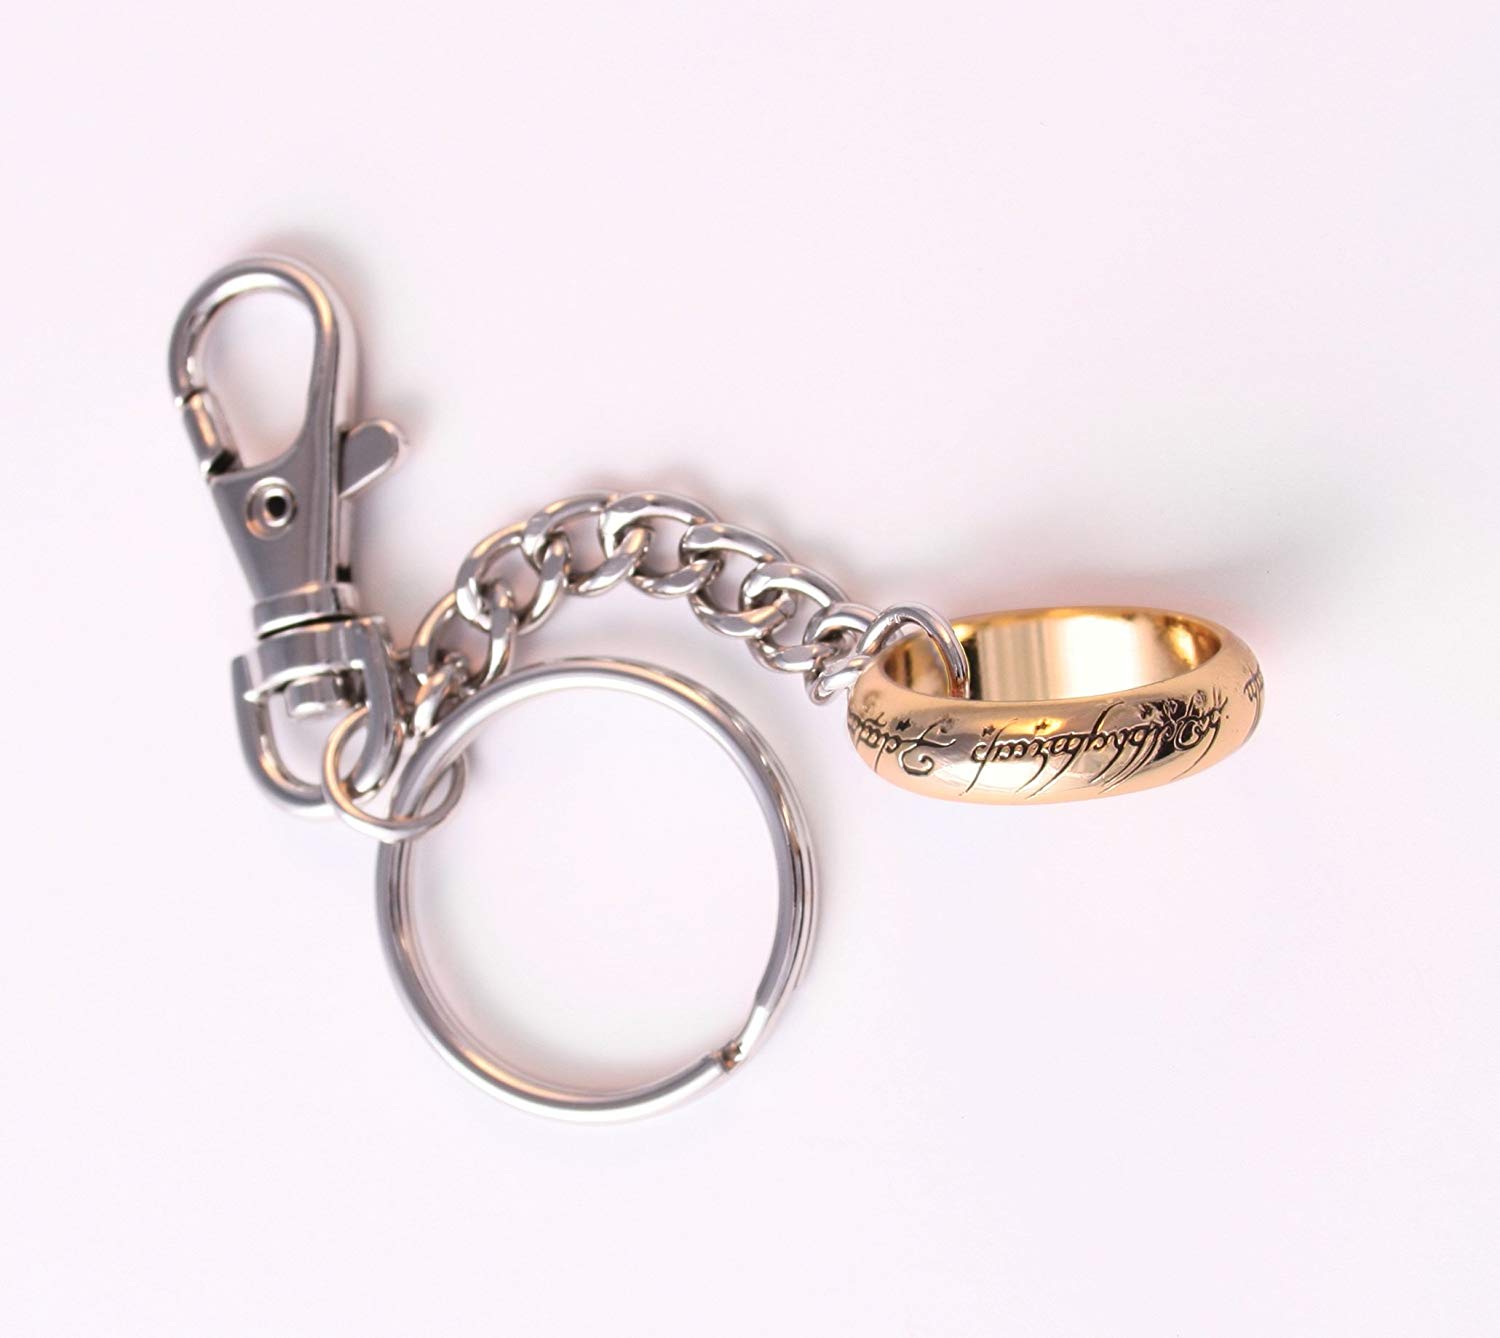 Lord of the Rings – The One Ring Key Chain